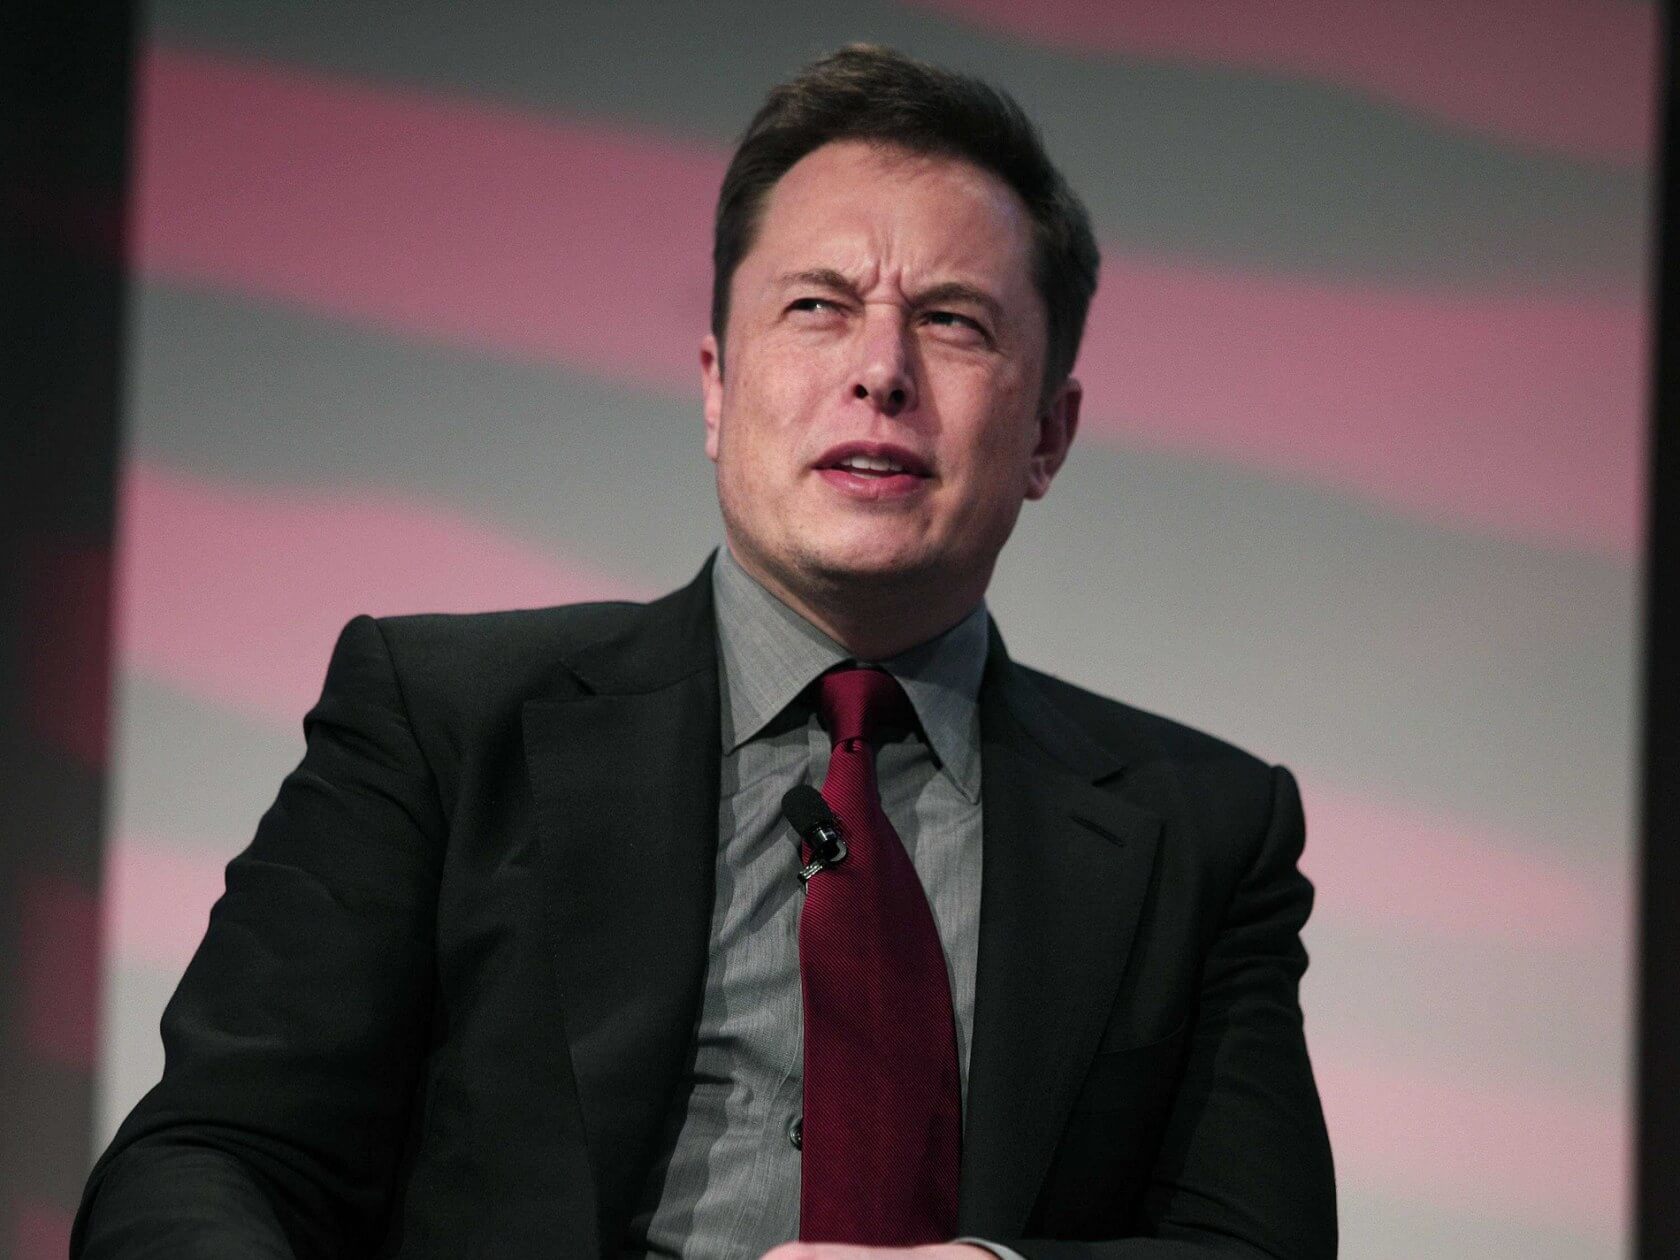 Elon Musk 'Ukraine peace plan' Twitter poll brings angry response from country's president